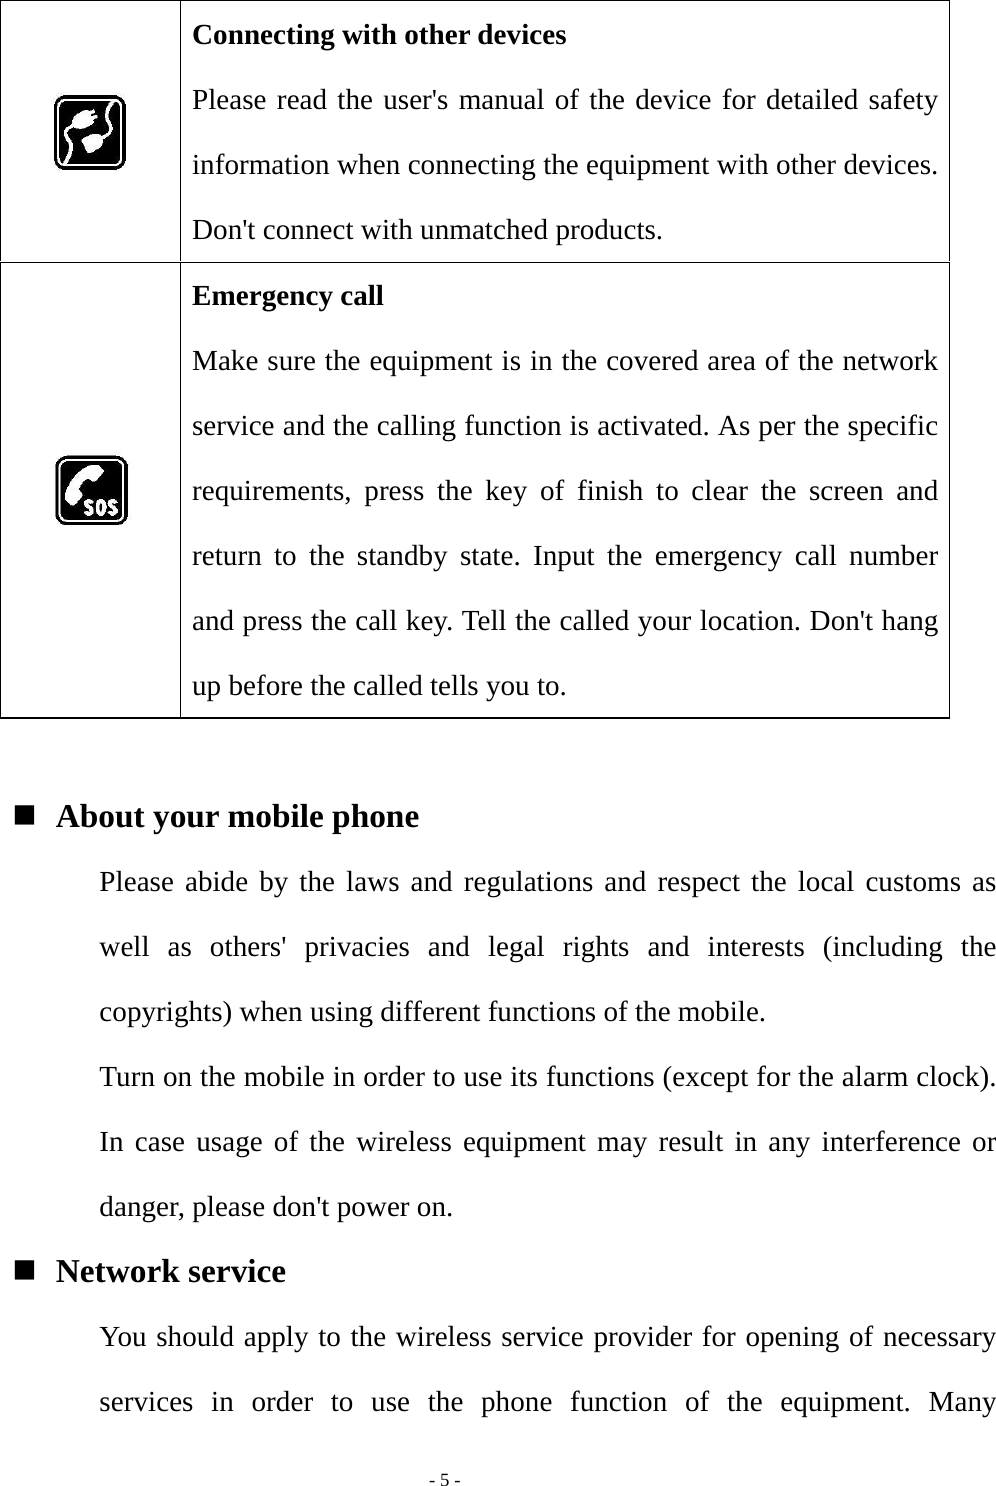   - 5 -  Connecting with other devices Please read the user&apos;s manual of the device for detailed safety information when connecting the equipment with other devices. Don&apos;t connect with unmatched products.  Emergency call Make sure the equipment is in the covered area of the network service and the calling function is activated. As per the specific requirements, press the key of finish to clear the screen and return to the standby state. Input the emergency call number and press the call key. Tell the called your location. Don&apos;t hang up before the called tells you to.   About your mobile phone Please abide by the laws and regulations and respect the local customs as well as others&apos; privacies and legal rights and interests (including the copyrights) when using different functions of the mobile. Turn on the mobile in order to use its functions (except for the alarm clock). In case usage of the wireless equipment may result in any interference or danger, please don&apos;t power on.  Network service You should apply to the wireless service provider for opening of necessary services in order to use the phone function of the equipment. Many 